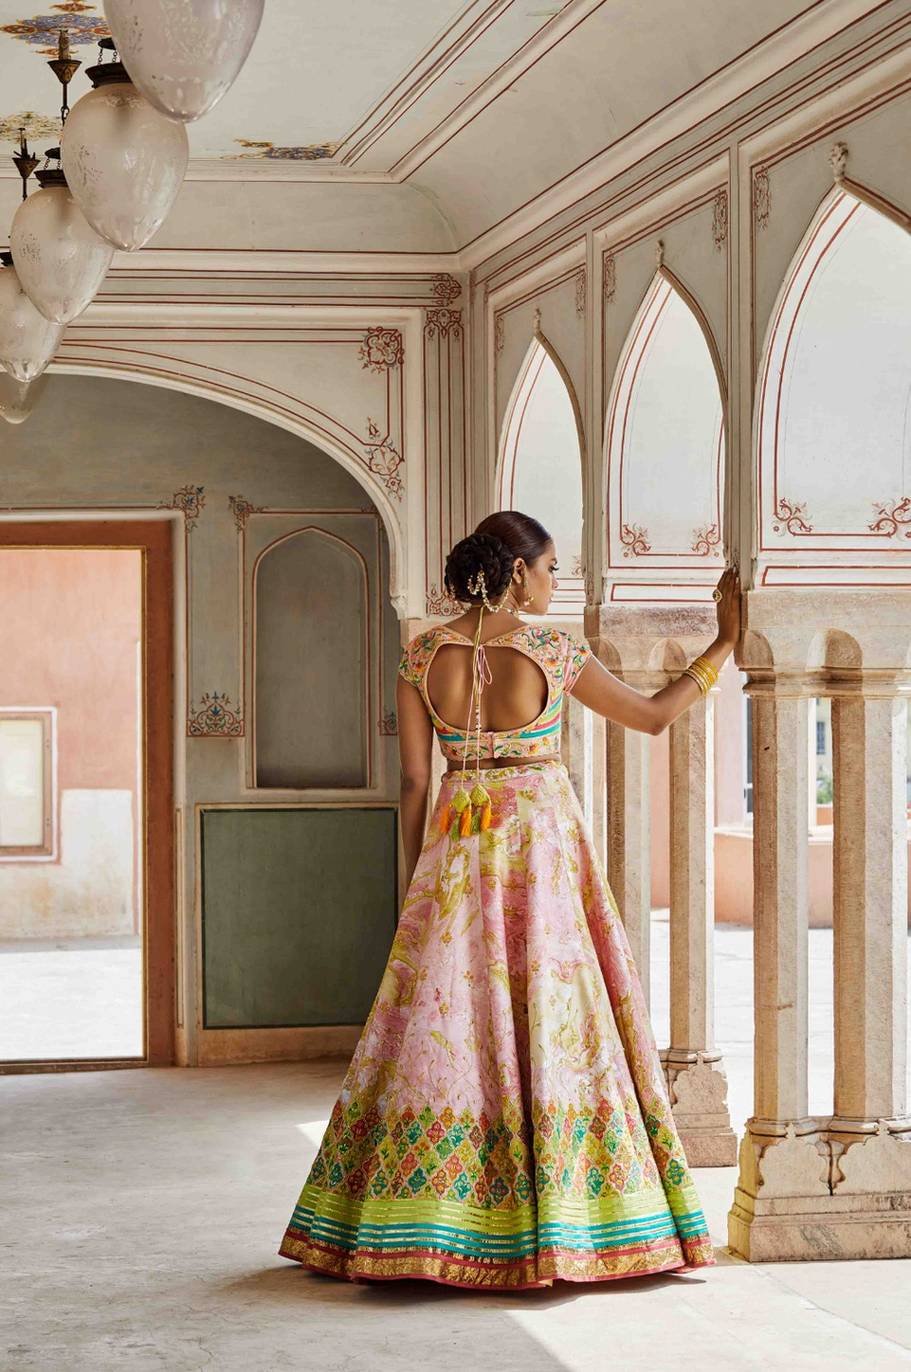 Hand Painted Lehenga Skirt With Beautiful Colour Embroidered With Contrast Blouse And Dupatta